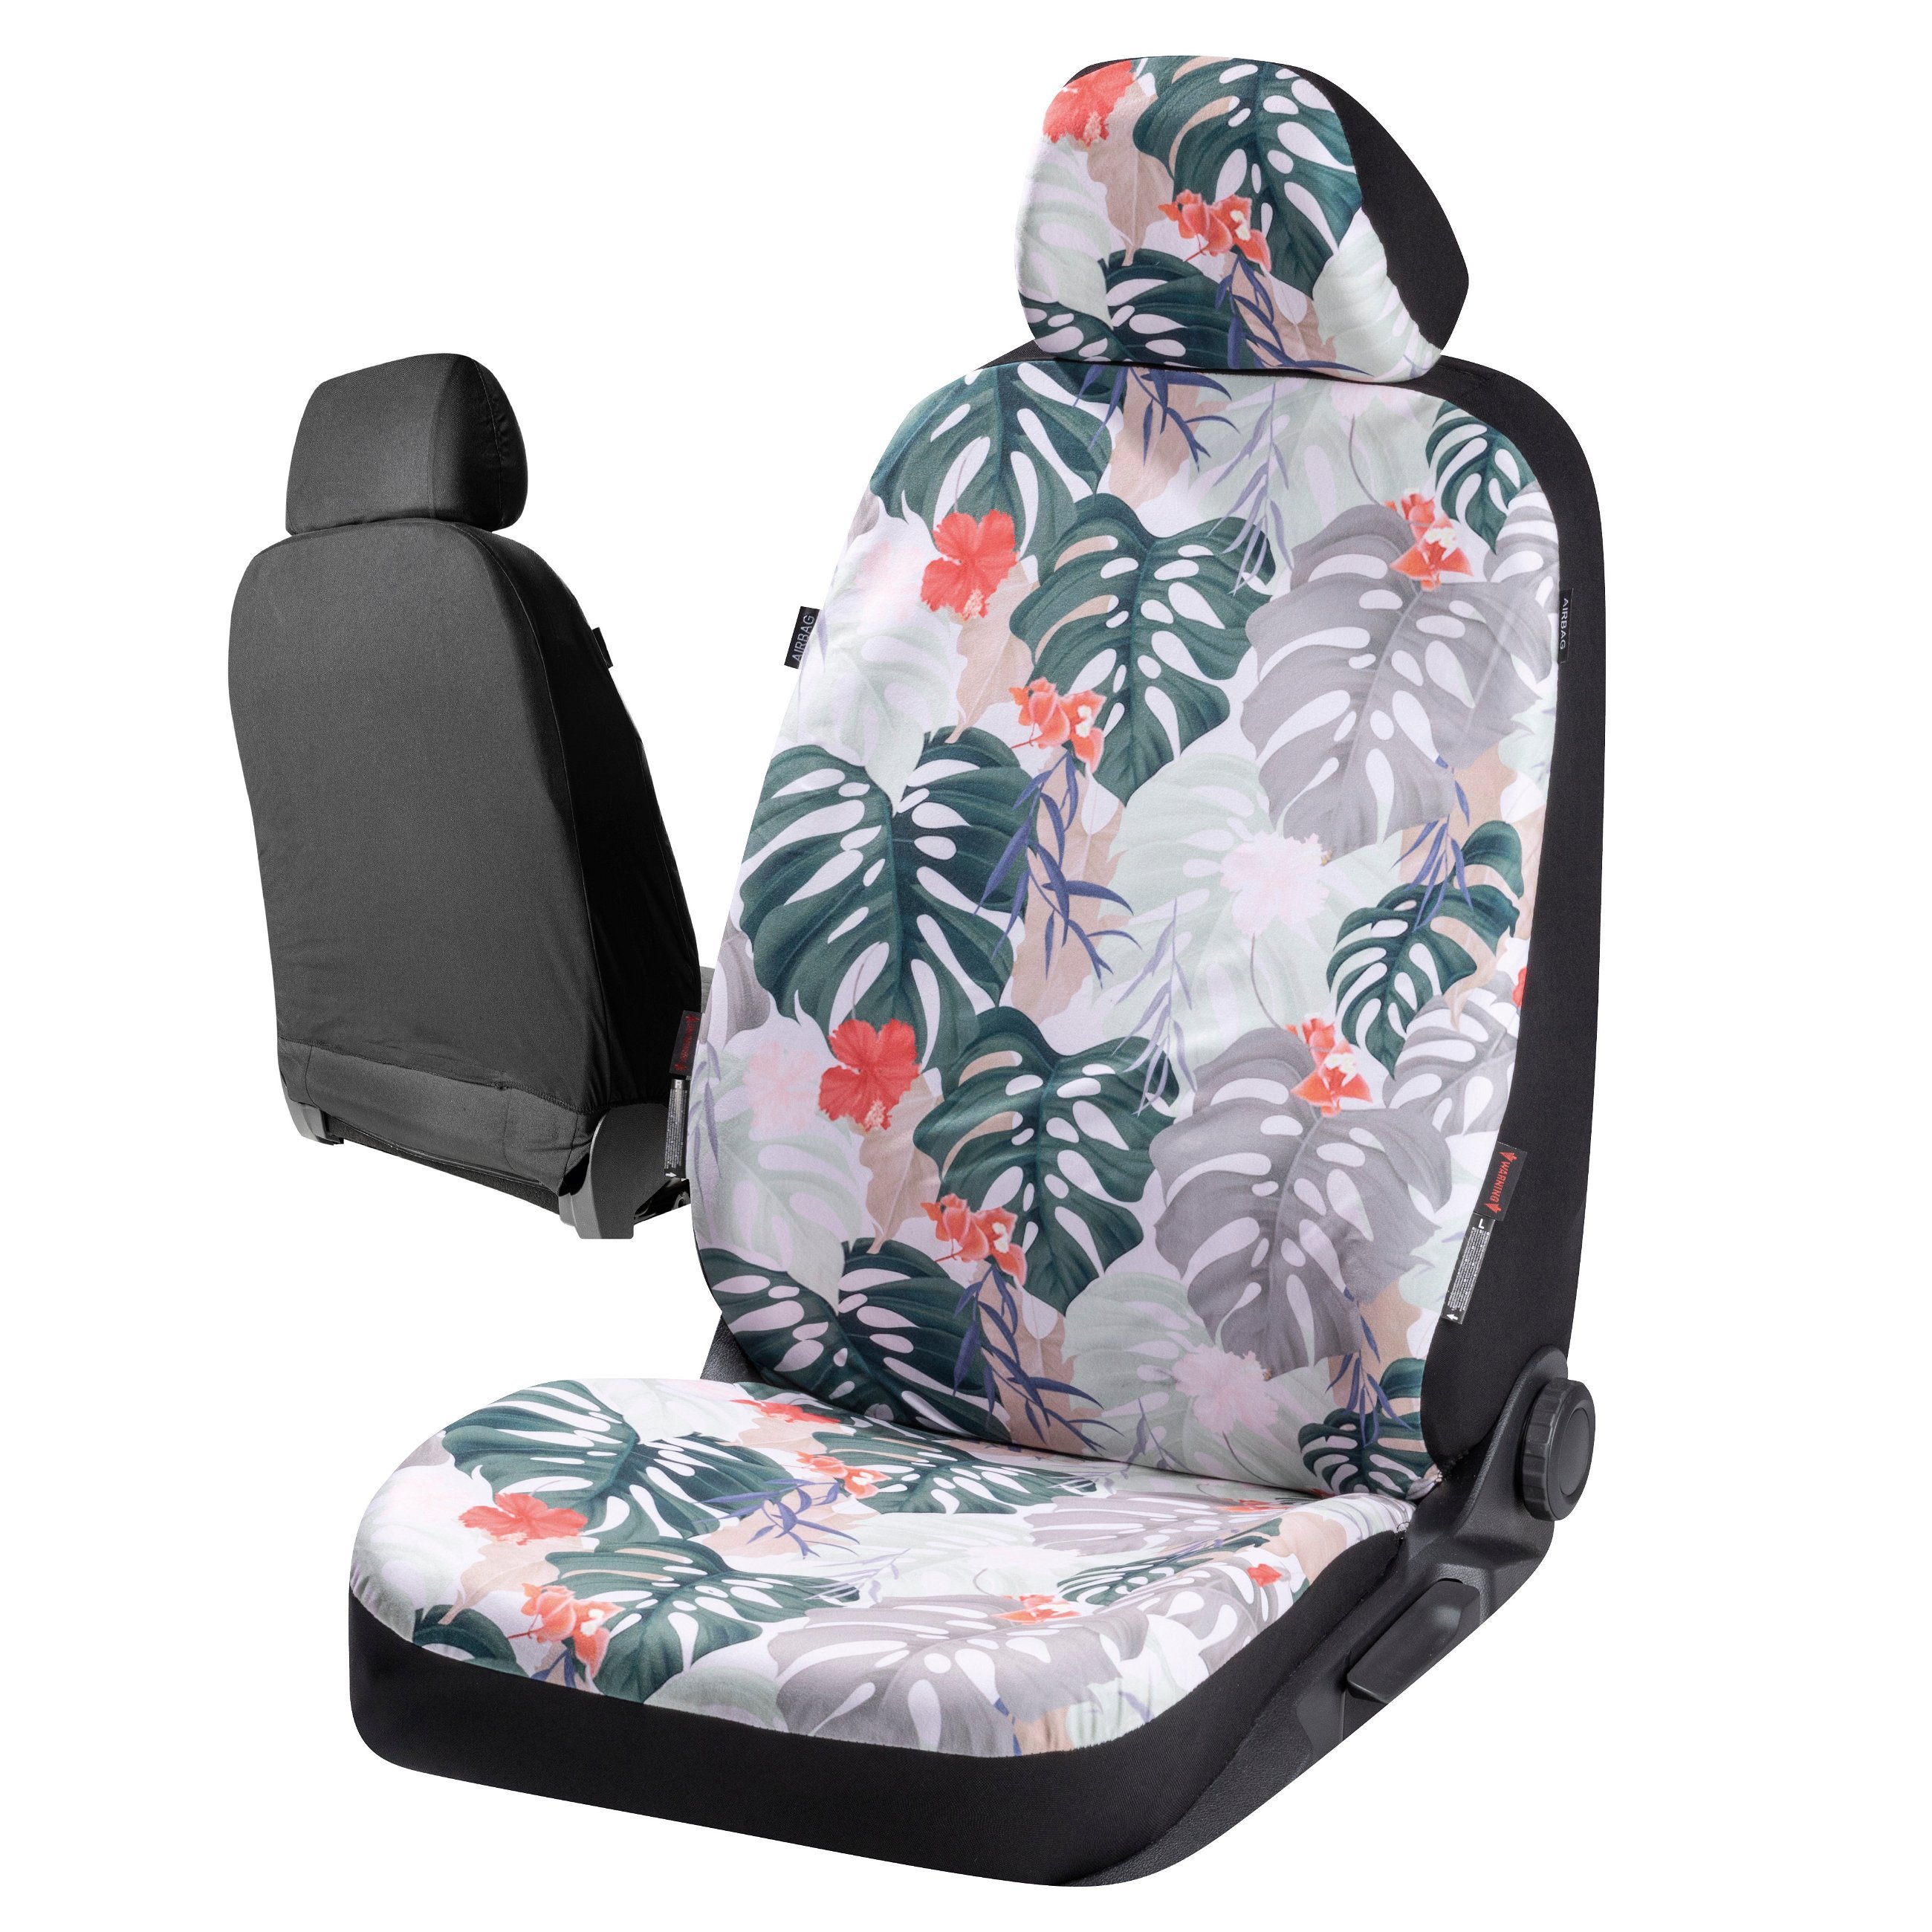 JOJOHUN Car Front Seat Covers Nonslip and Breathable Van Seat Covers Only Fit for Detachable Headrest Black White - 1 seat in front seat 